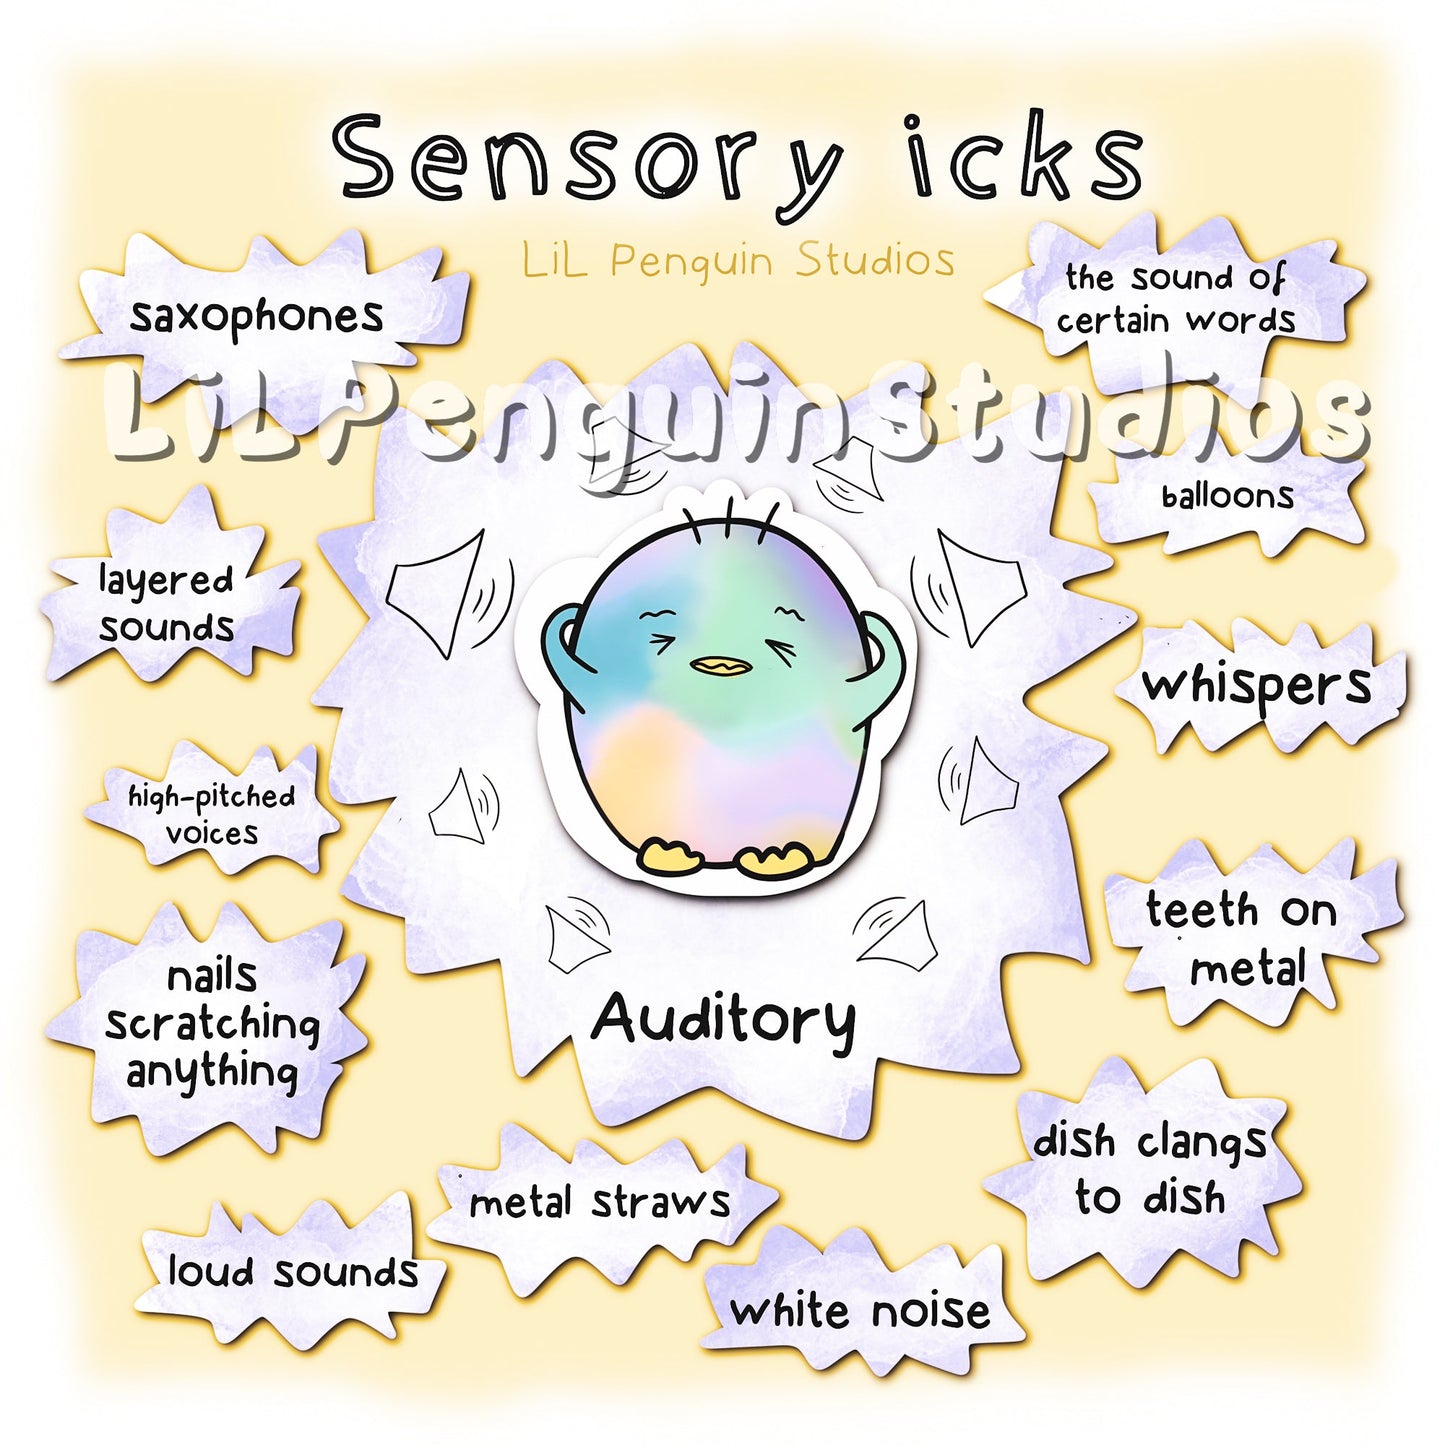 'Sensory Icks' Printable Bundle with Worksheets - For Institutions, journals, etc.